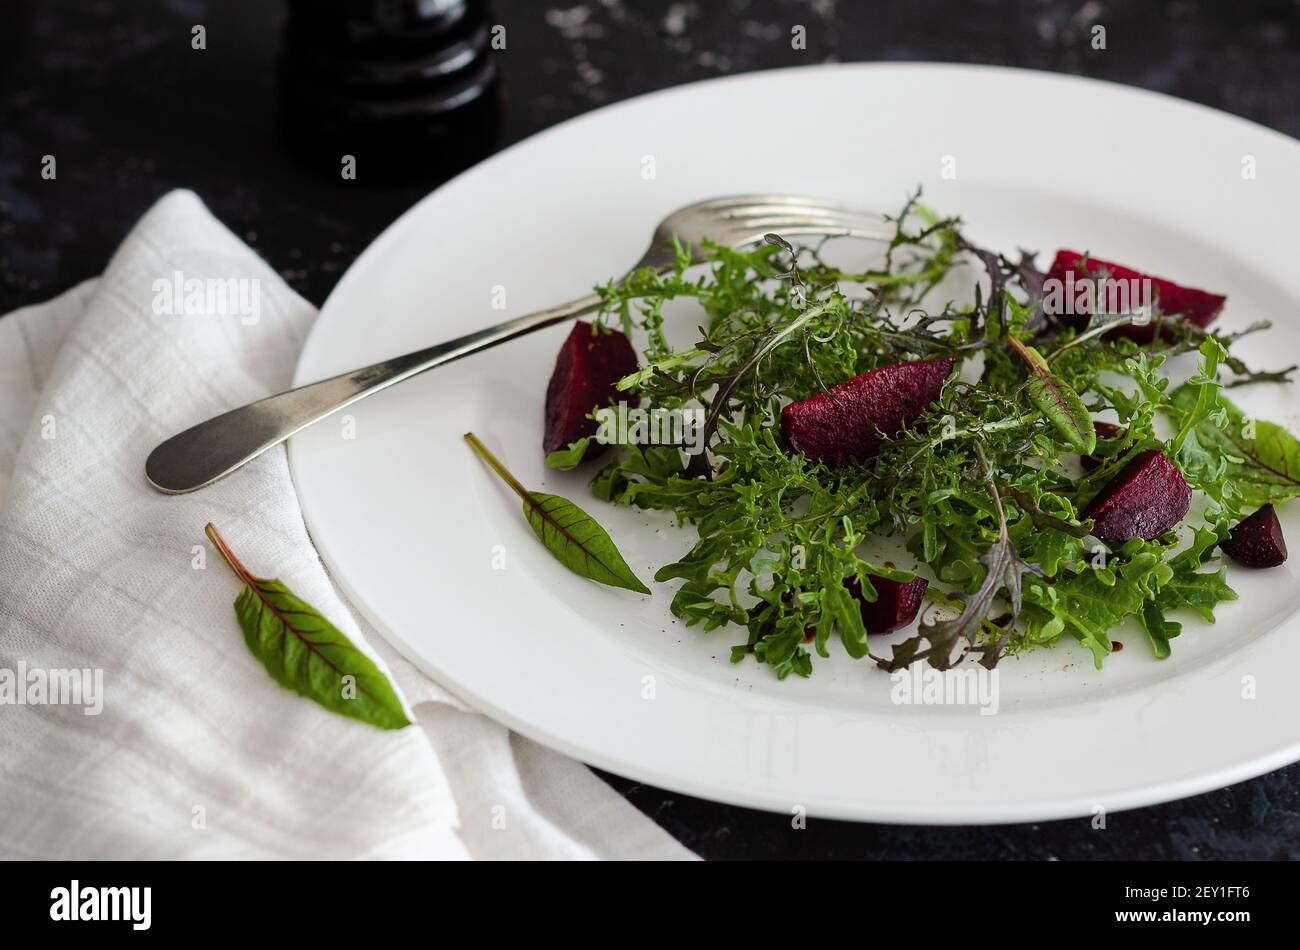 Green and purple mizuna and beetroot salad in a white plate, with a fork and a white napkin, on black backdrop. Stock Photo